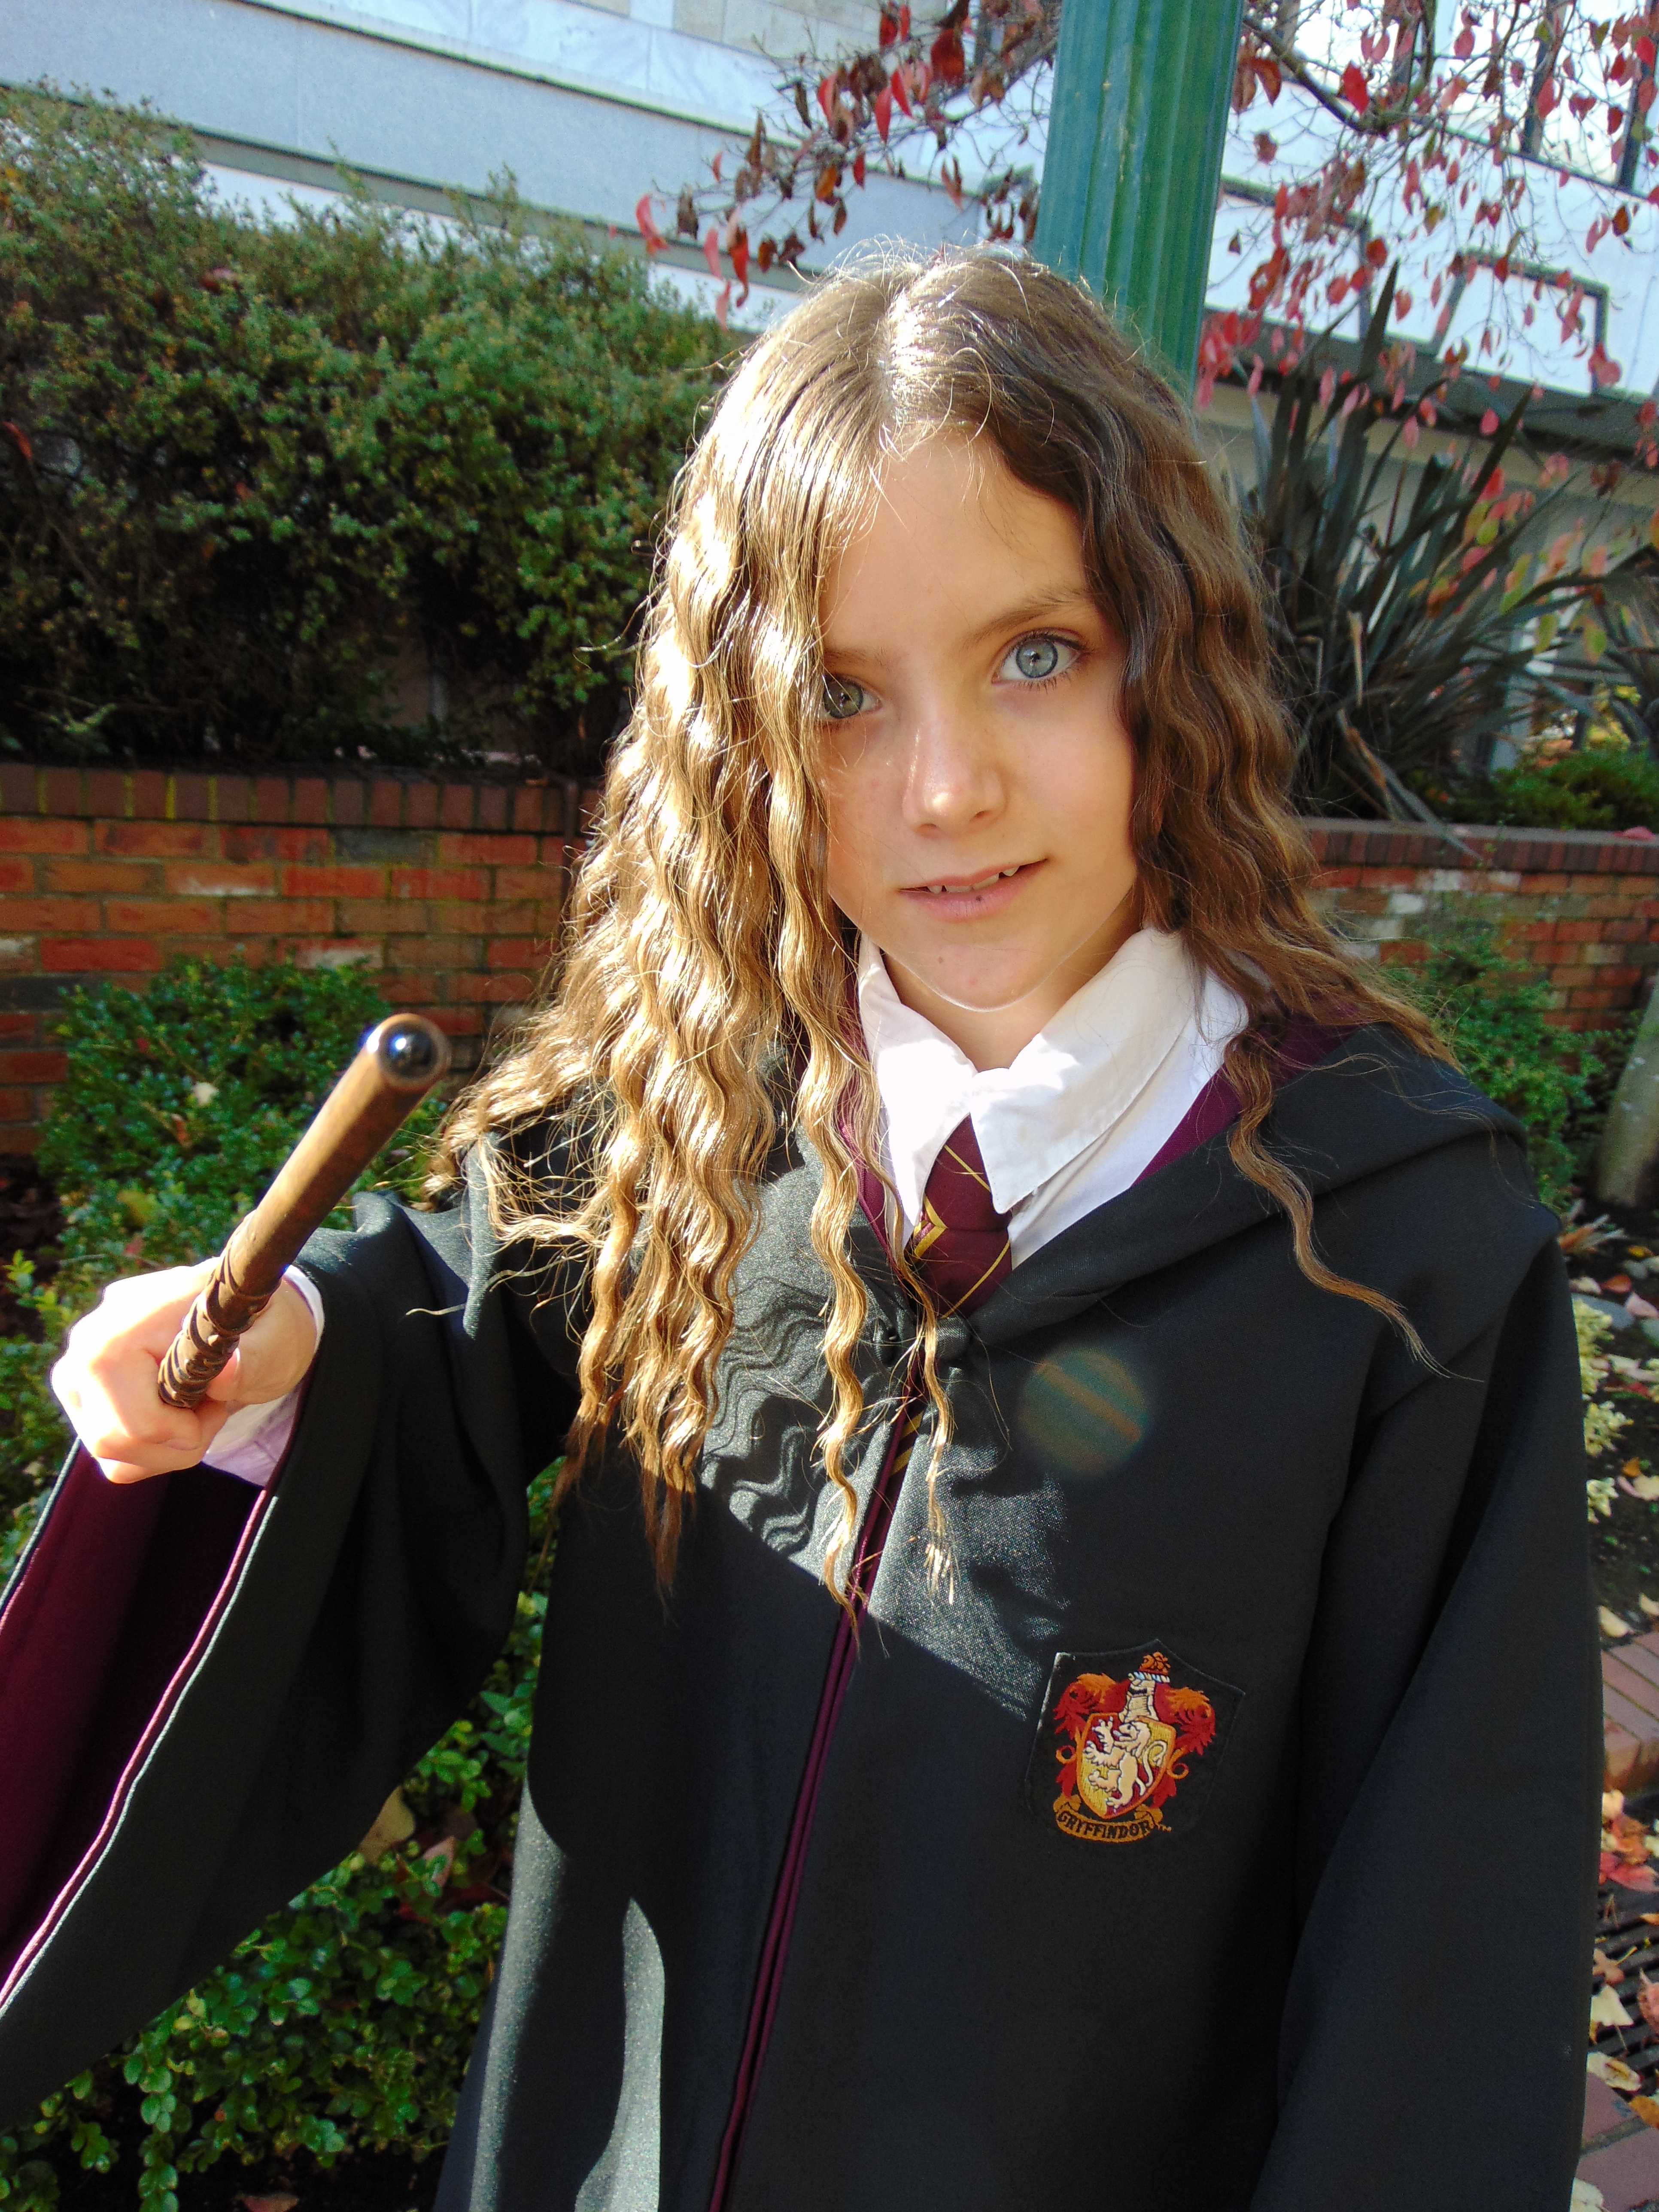 My Griffindor Uniform for the Olde Towne Halloween Fashion Show, 2014 .... Alohamora!